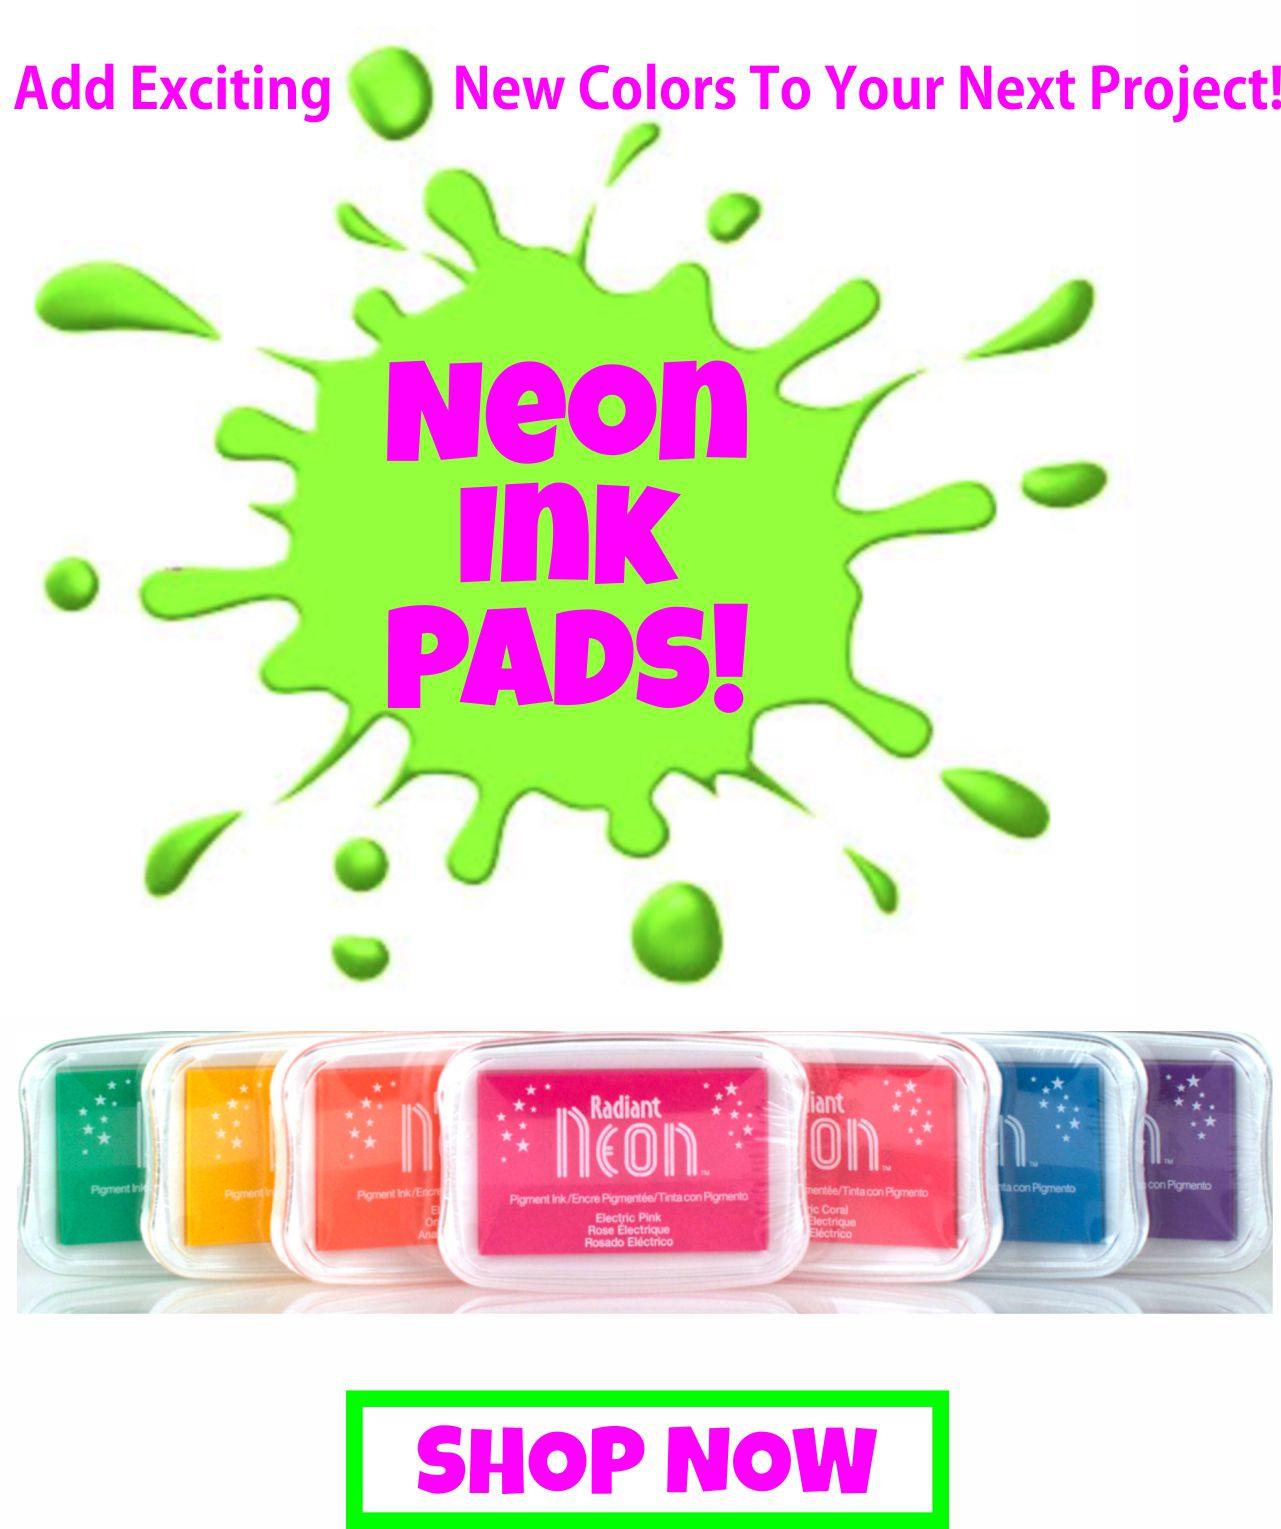 Radiant Neon Electric Ink Pad, Pink